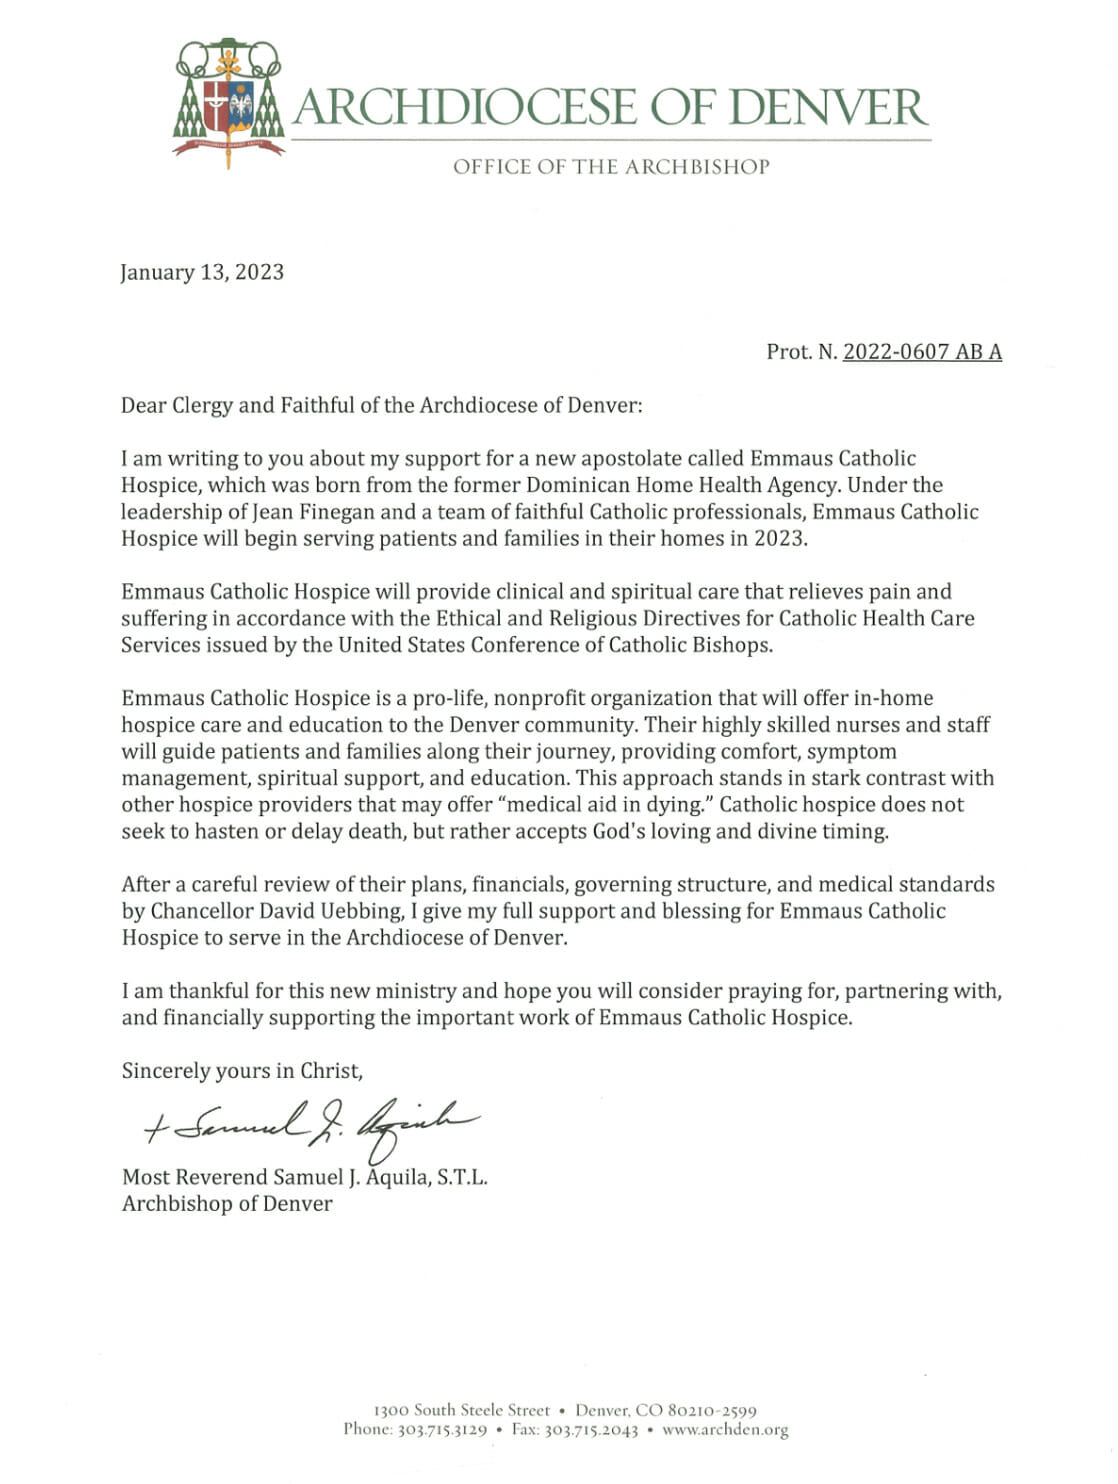 Letter of full support and blessing from Archbishop Aquila for Emmaus Catholic Hospice